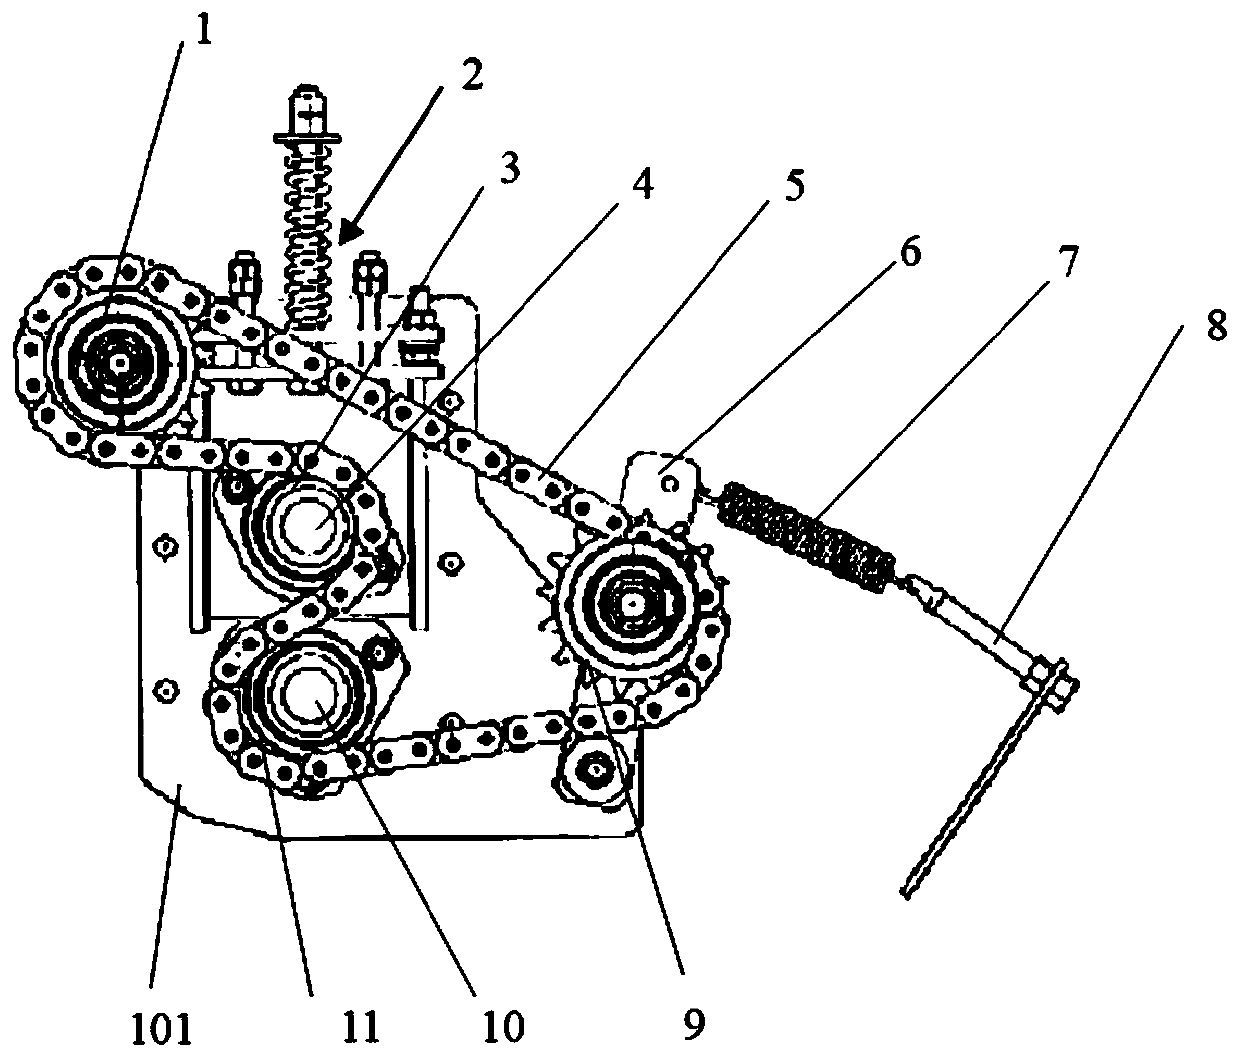 Floating impurity removal device applicable to position of secondary stem pulling on corn harvester